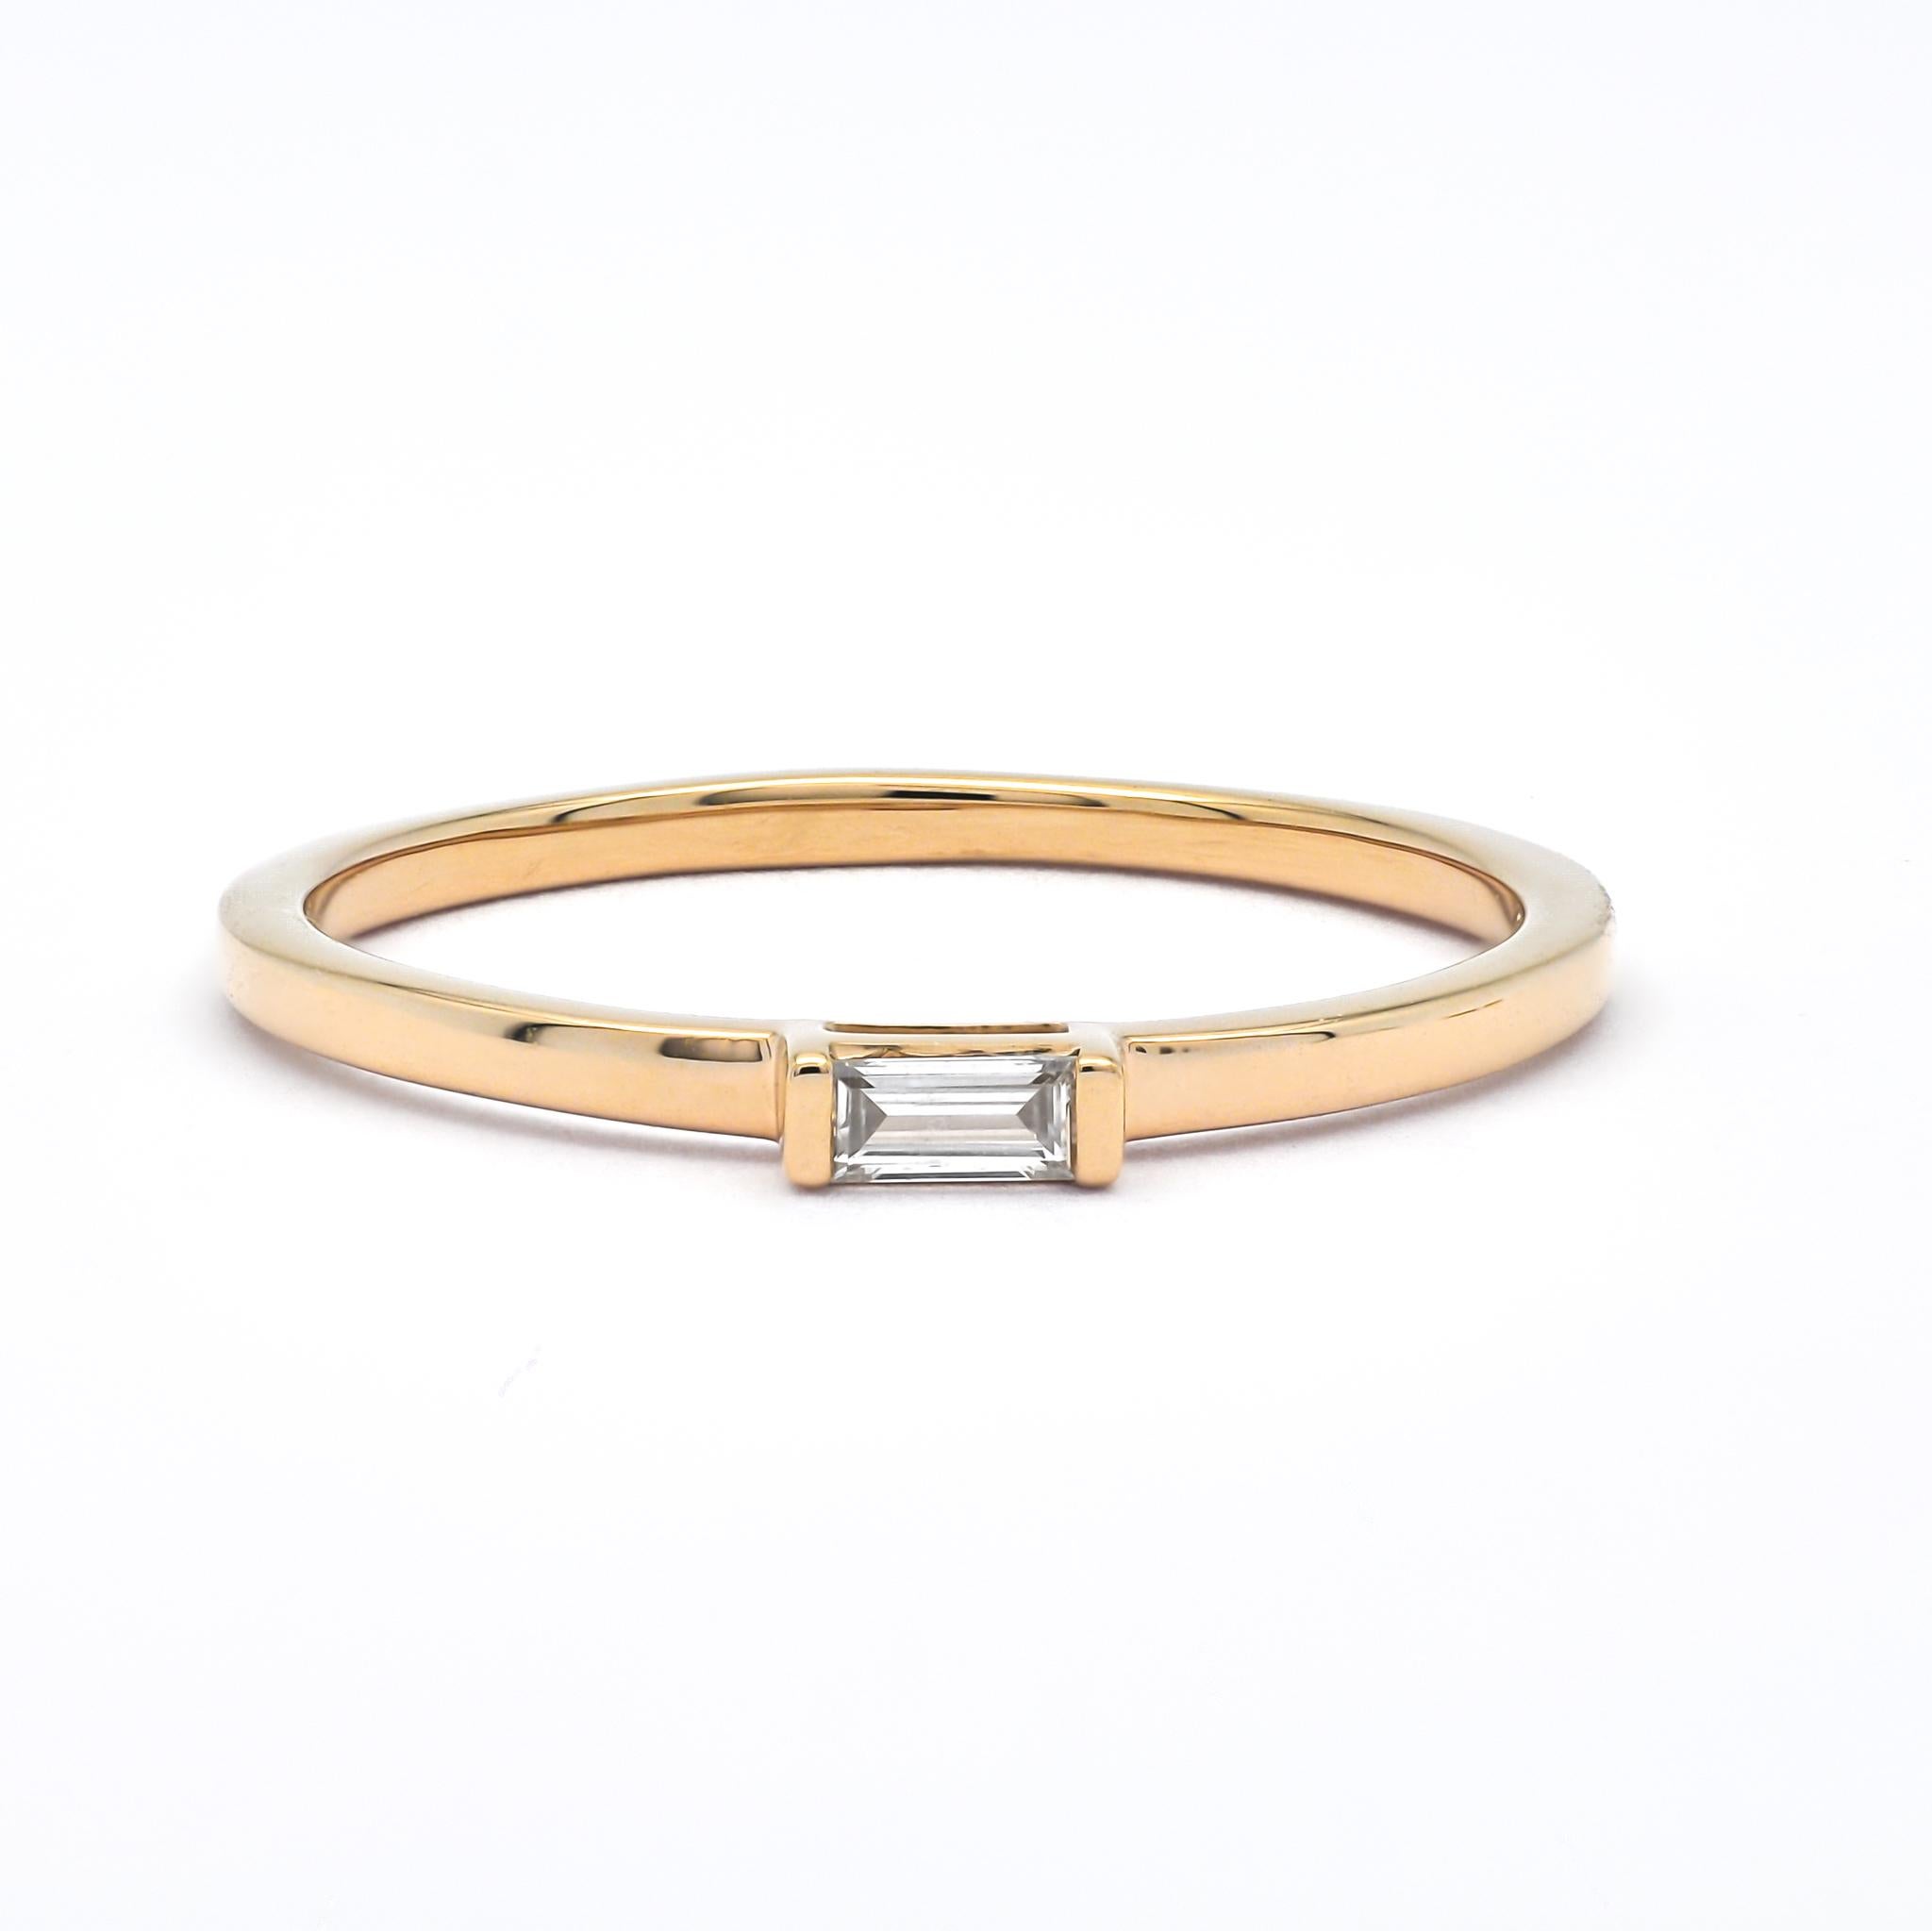 Behold the 18kt Rose Gold Natural Diamond Solitaire Baguette Ring, a masterpiece of grace and refinement. Crafted with precision from 18kt Rose gold, this ring features a Baguette cut 0.06-carat natural diamond in a classic solitaire setting.

 Its